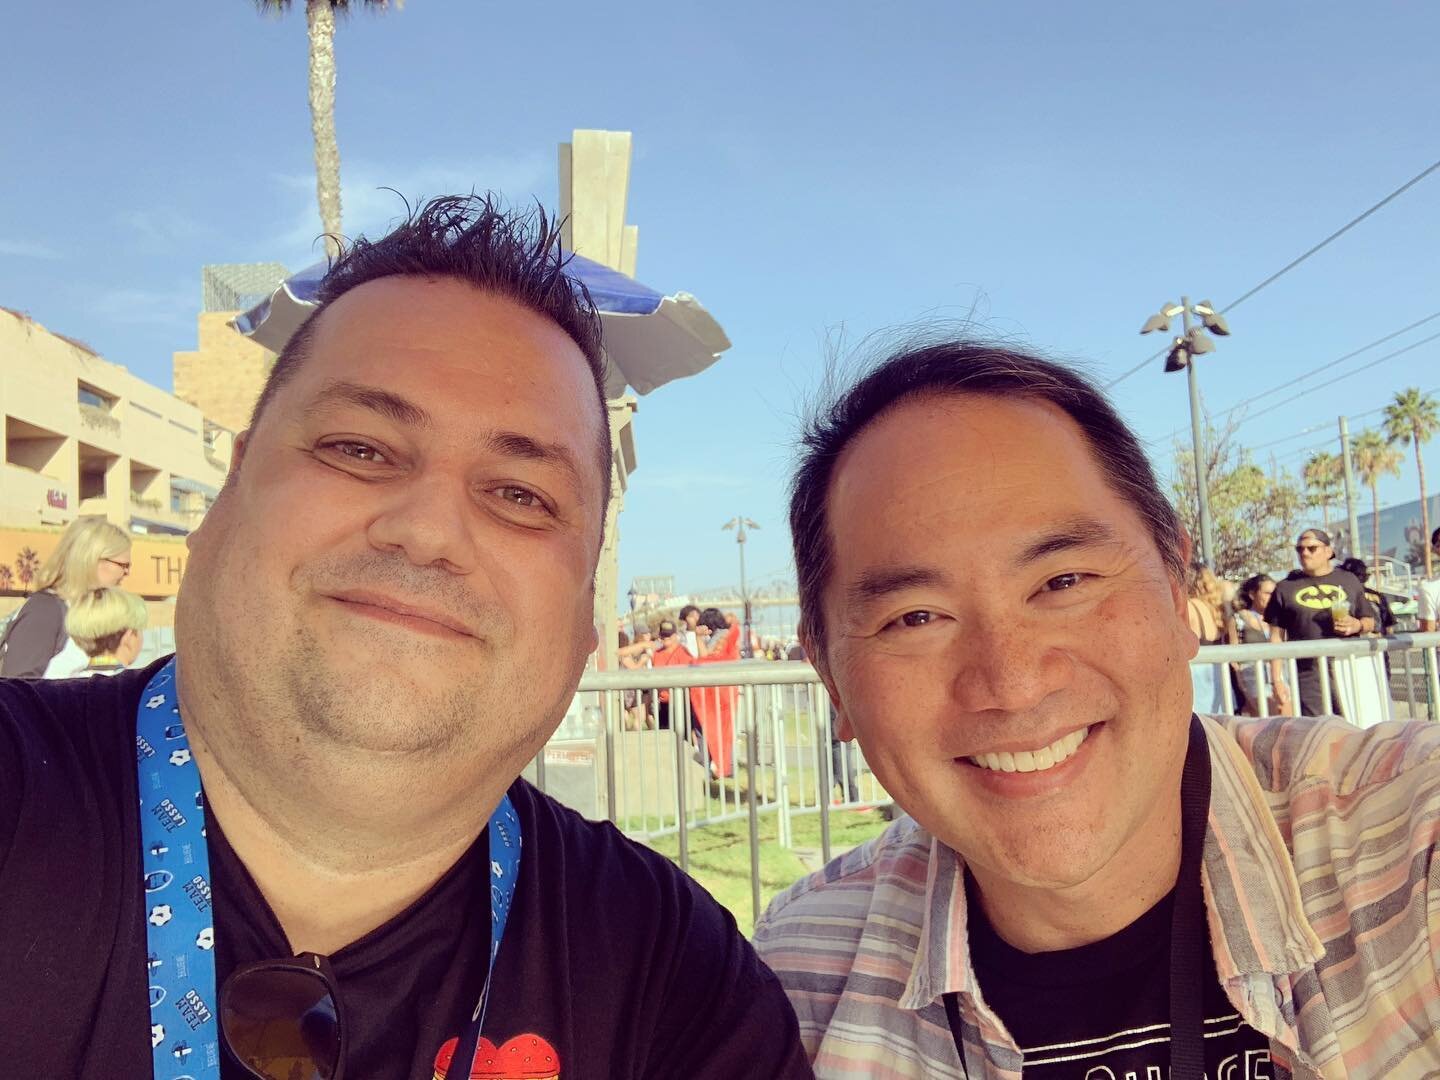 It was great to finally meet @keisukehoashi at SDCC this year! Keisuke voices Shinjin Kojima aka &ldquo;Hawk&rdquo; on @bobsburgersfox He stopped by the Fan Meat Up &amp; Trivia that @tinapocalypse &amp; @northtowharf co-hosted and did an impromptu s